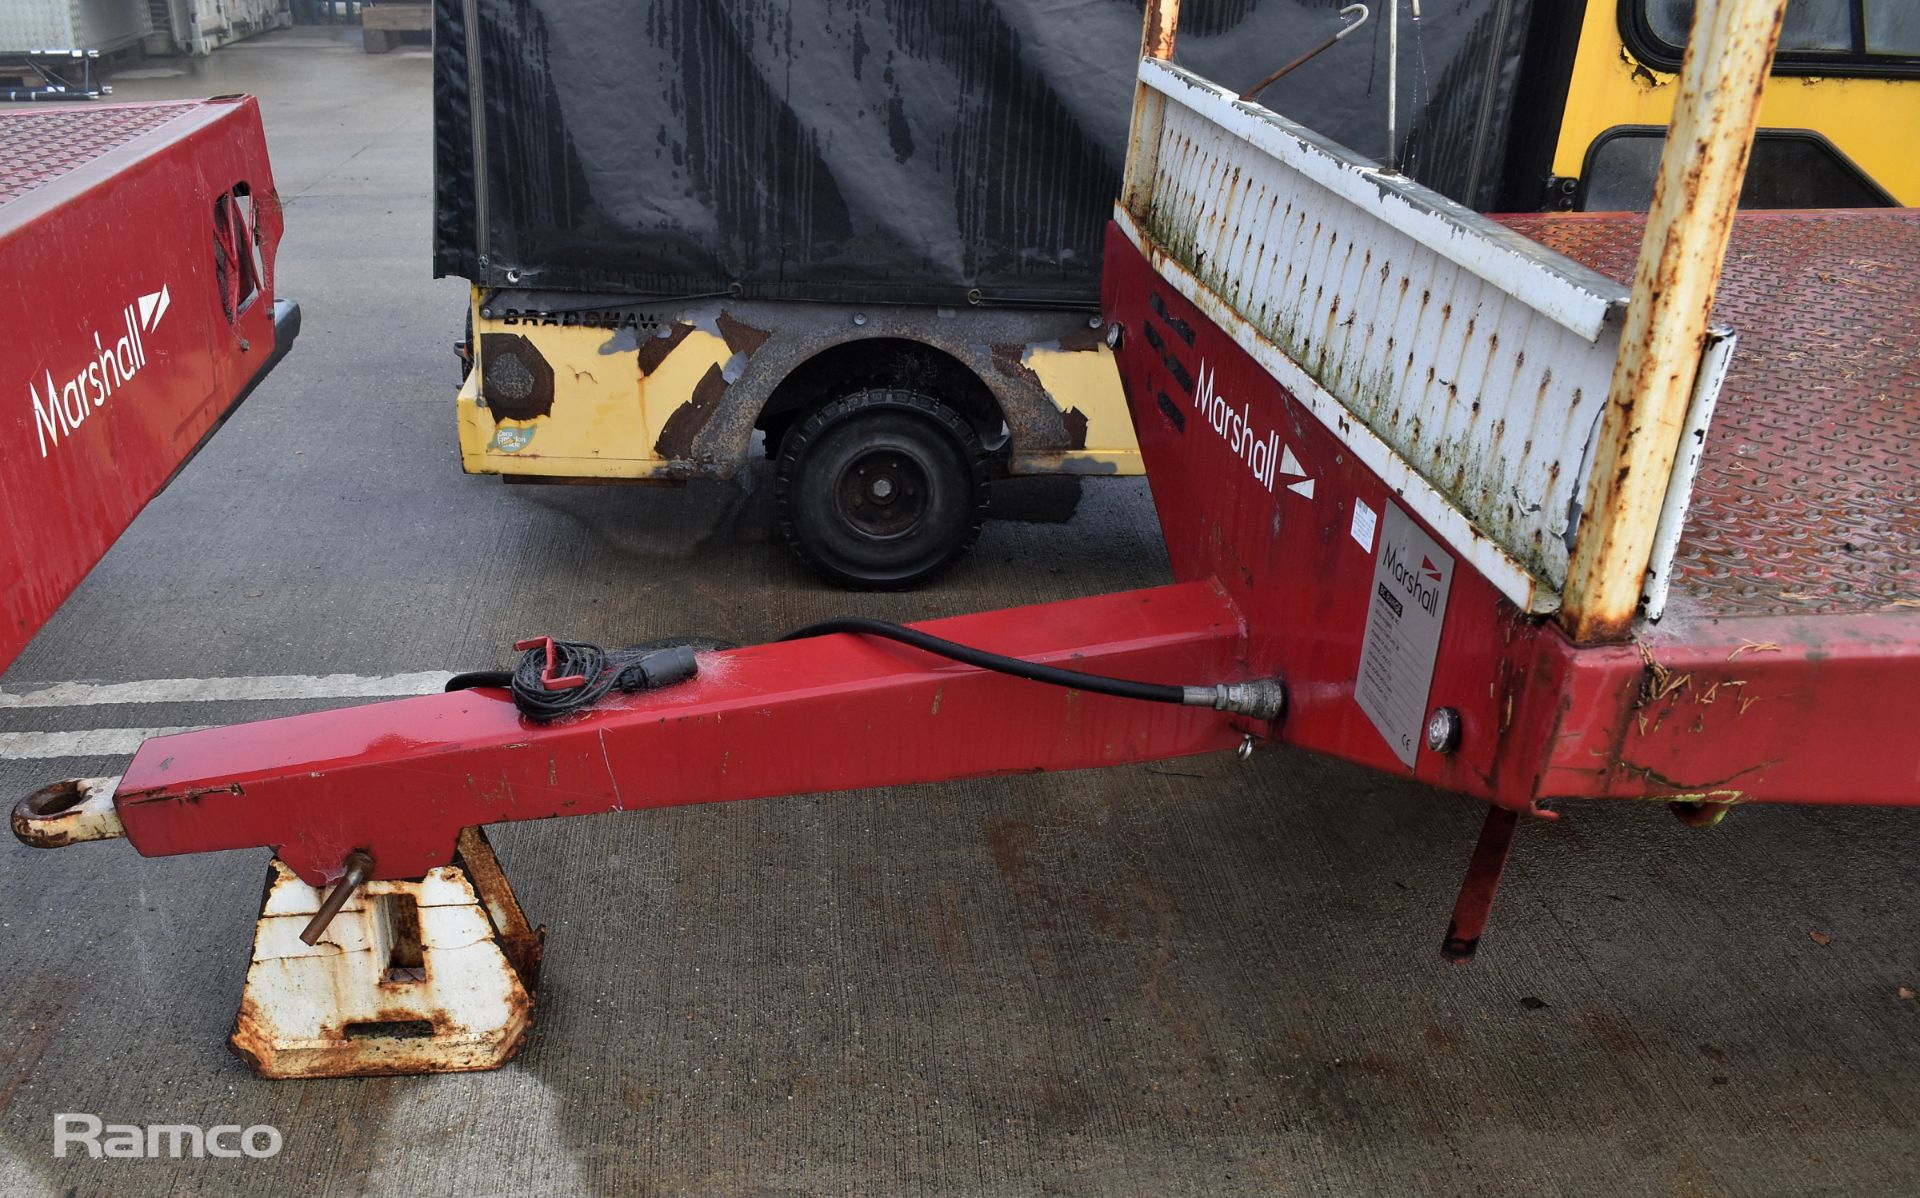 Marshall BC18N 2019 single axle flatbed trailer - 5000kg carrying capacity - serial number 107531 - Image 7 of 12